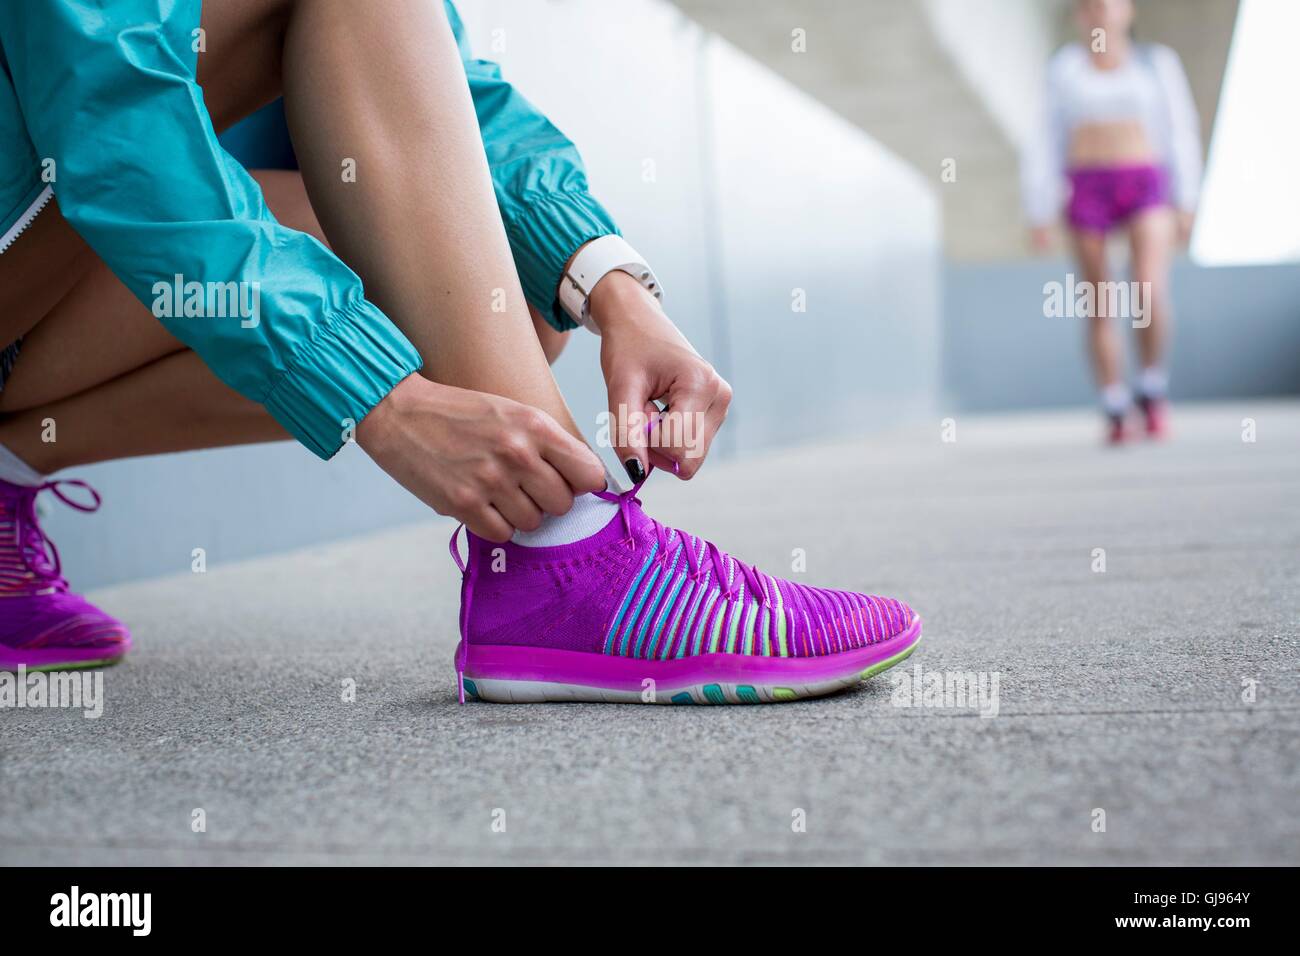 MODEL RELEASED. Woman tying laces on trainers. Stock Photo